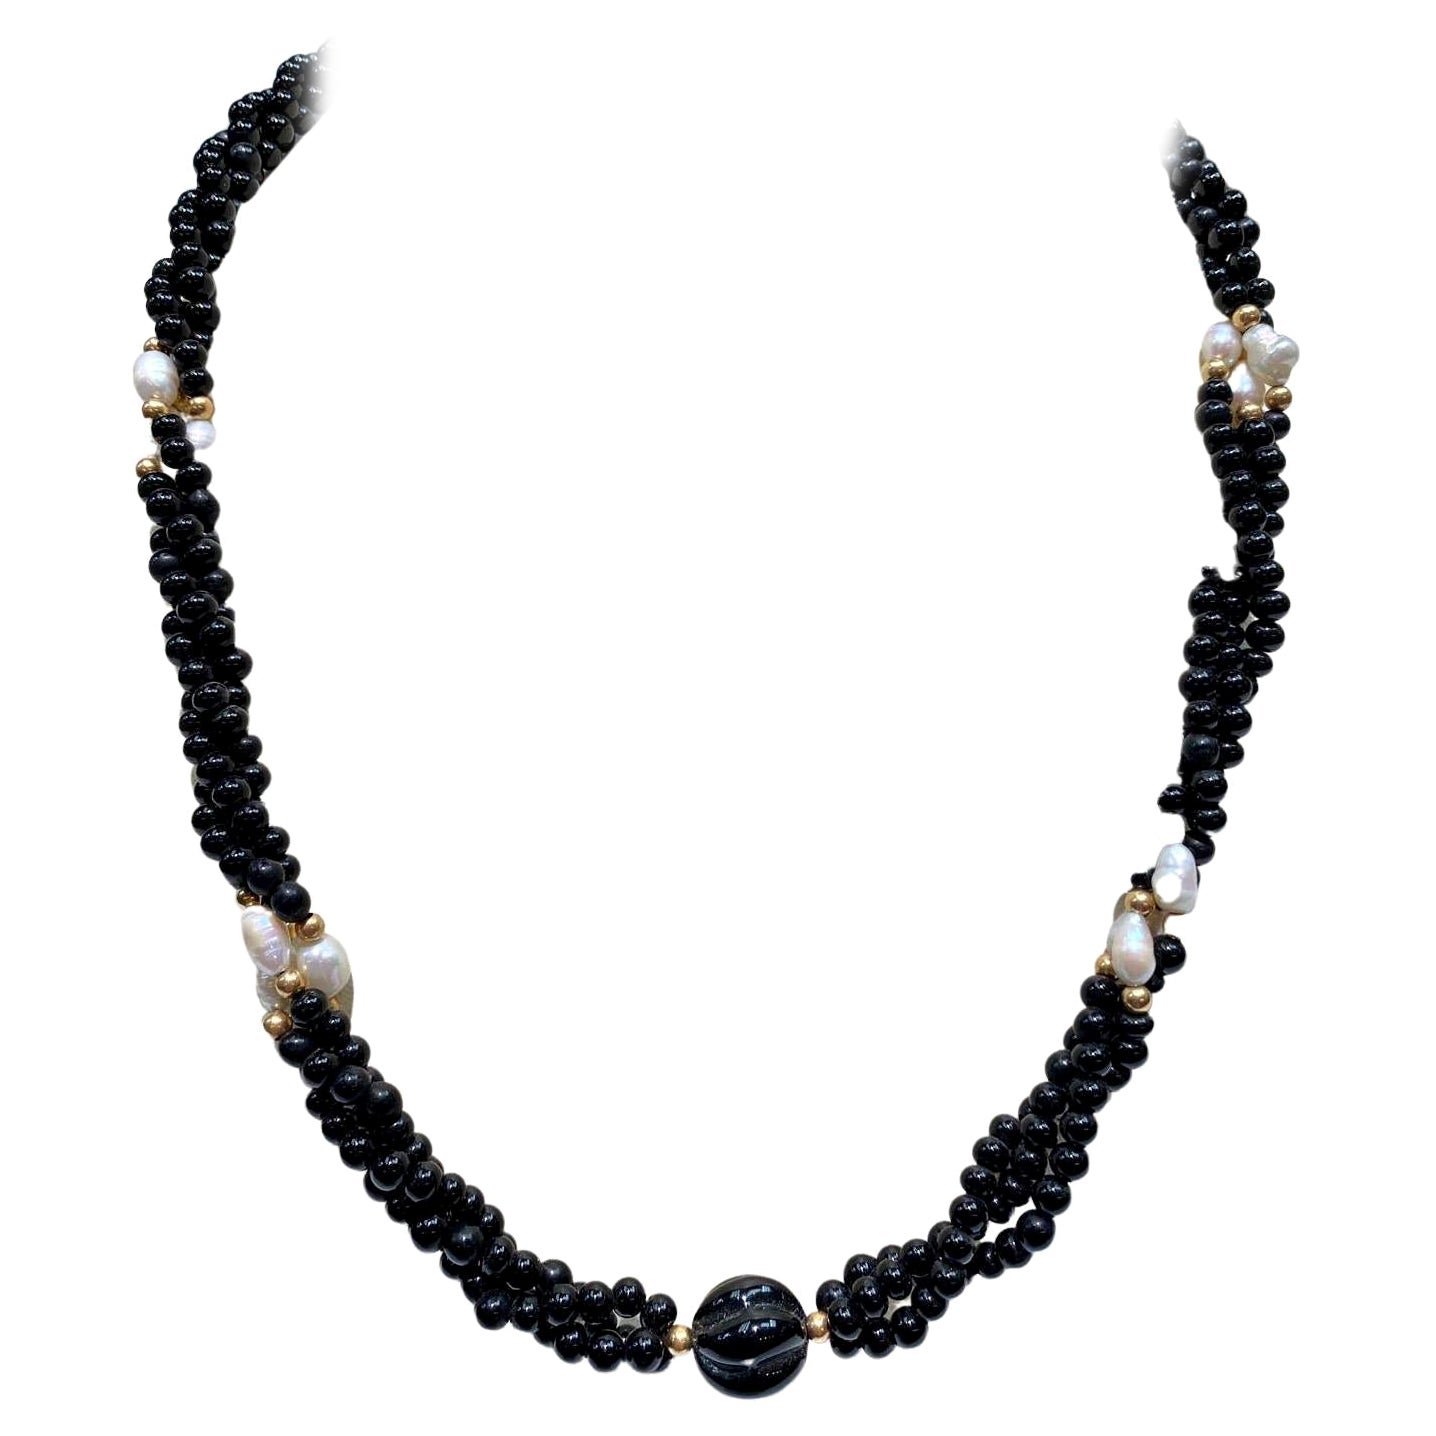 3 Strands of Onyx Pearls with 8pcs of Freshwater Pearls and Onyx Centerpiece For Sale